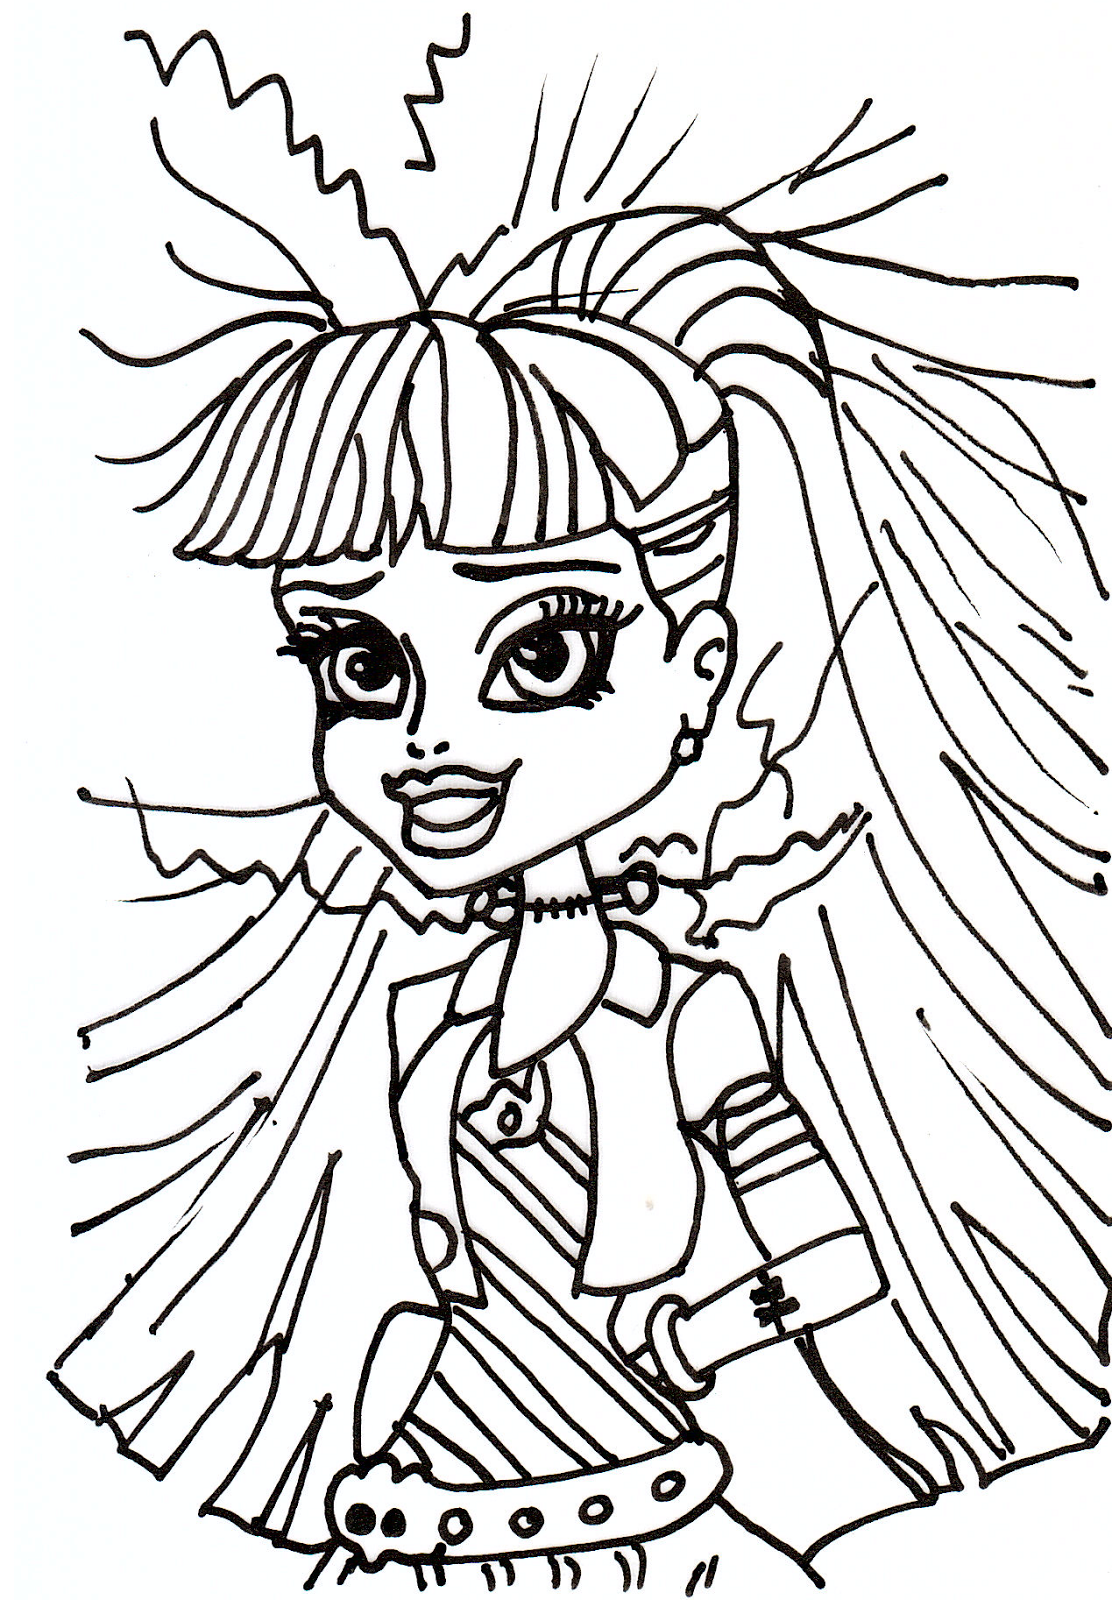 Download Free Printable Monster High Coloring Pages: Frankie Stein Picture Day Coloring Sheet